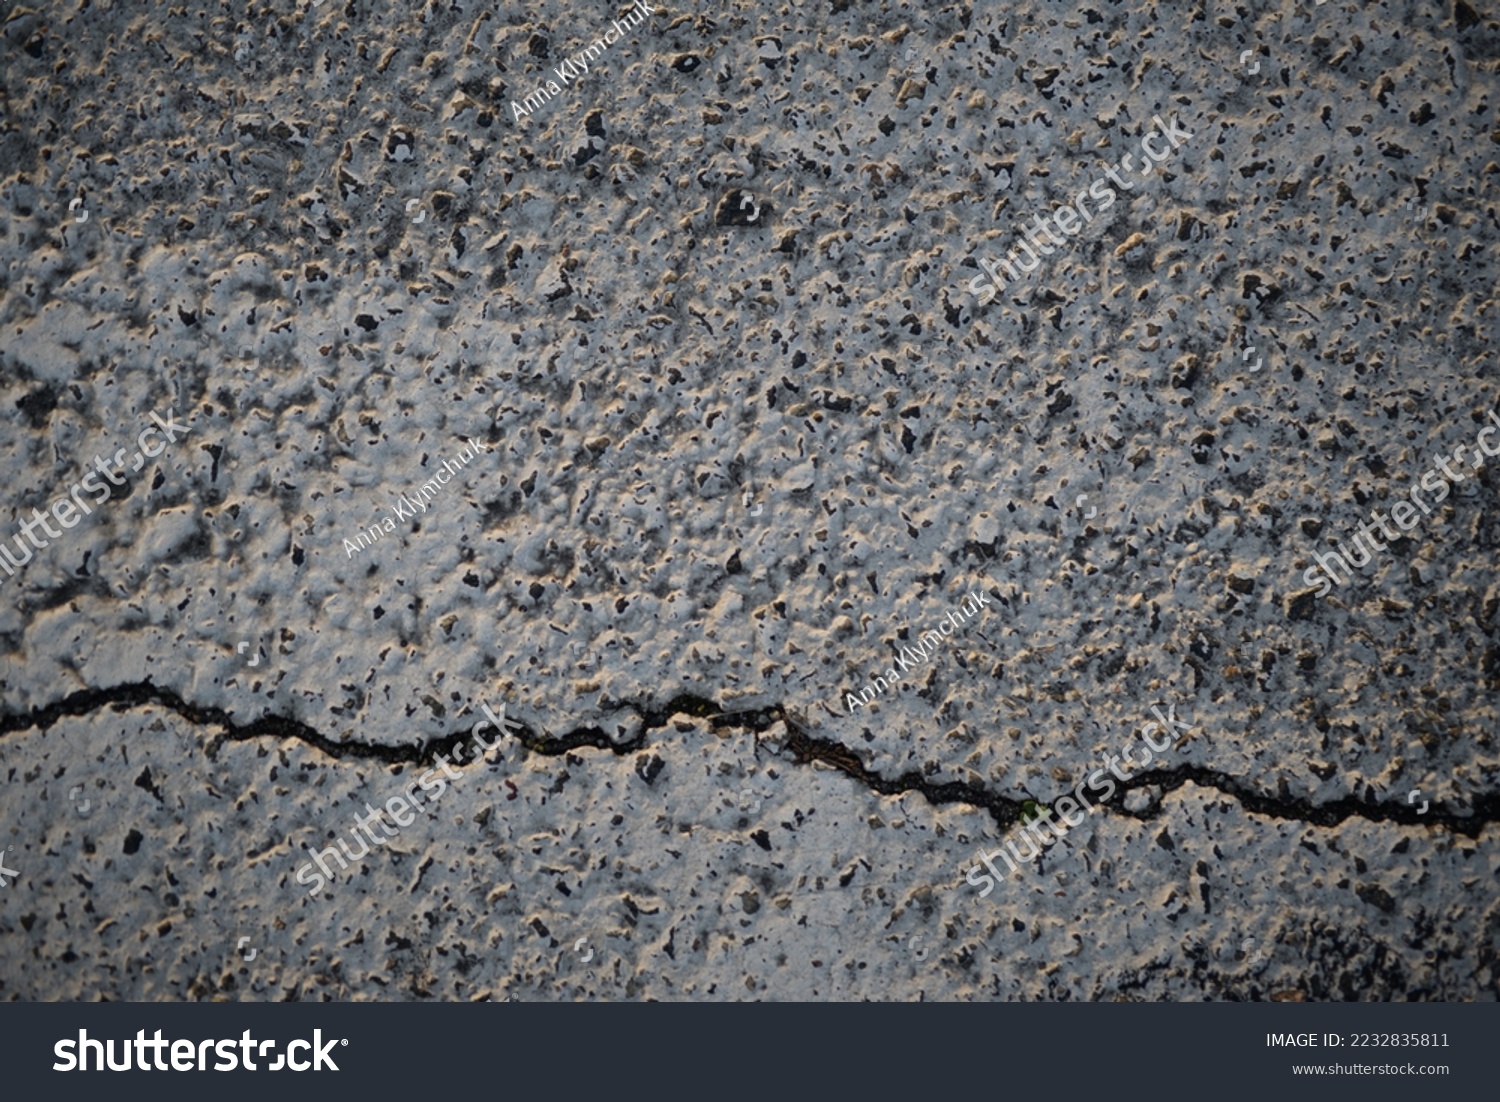 texture of white paint for road marking on asphalt, texture of painted asphalt cracked texture white background, white background on gray asphalt, pedestrian crossing, new road marking close up	 #2232835811